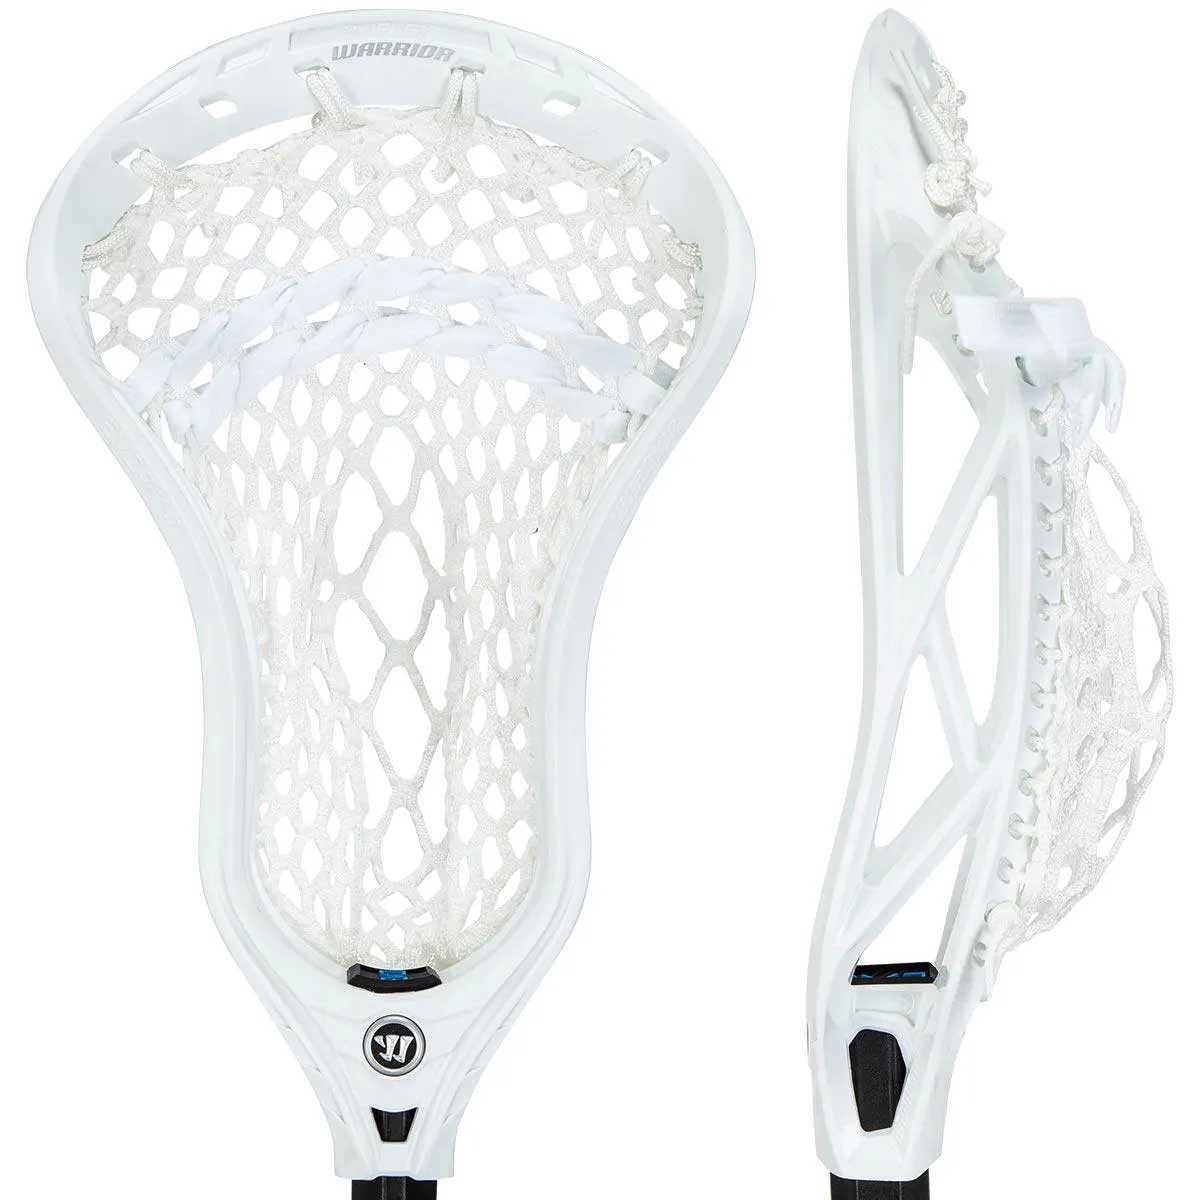 Full picture of the white Warrior EVO QX2-D ISO Warp Strung Defense Lacrosse Head